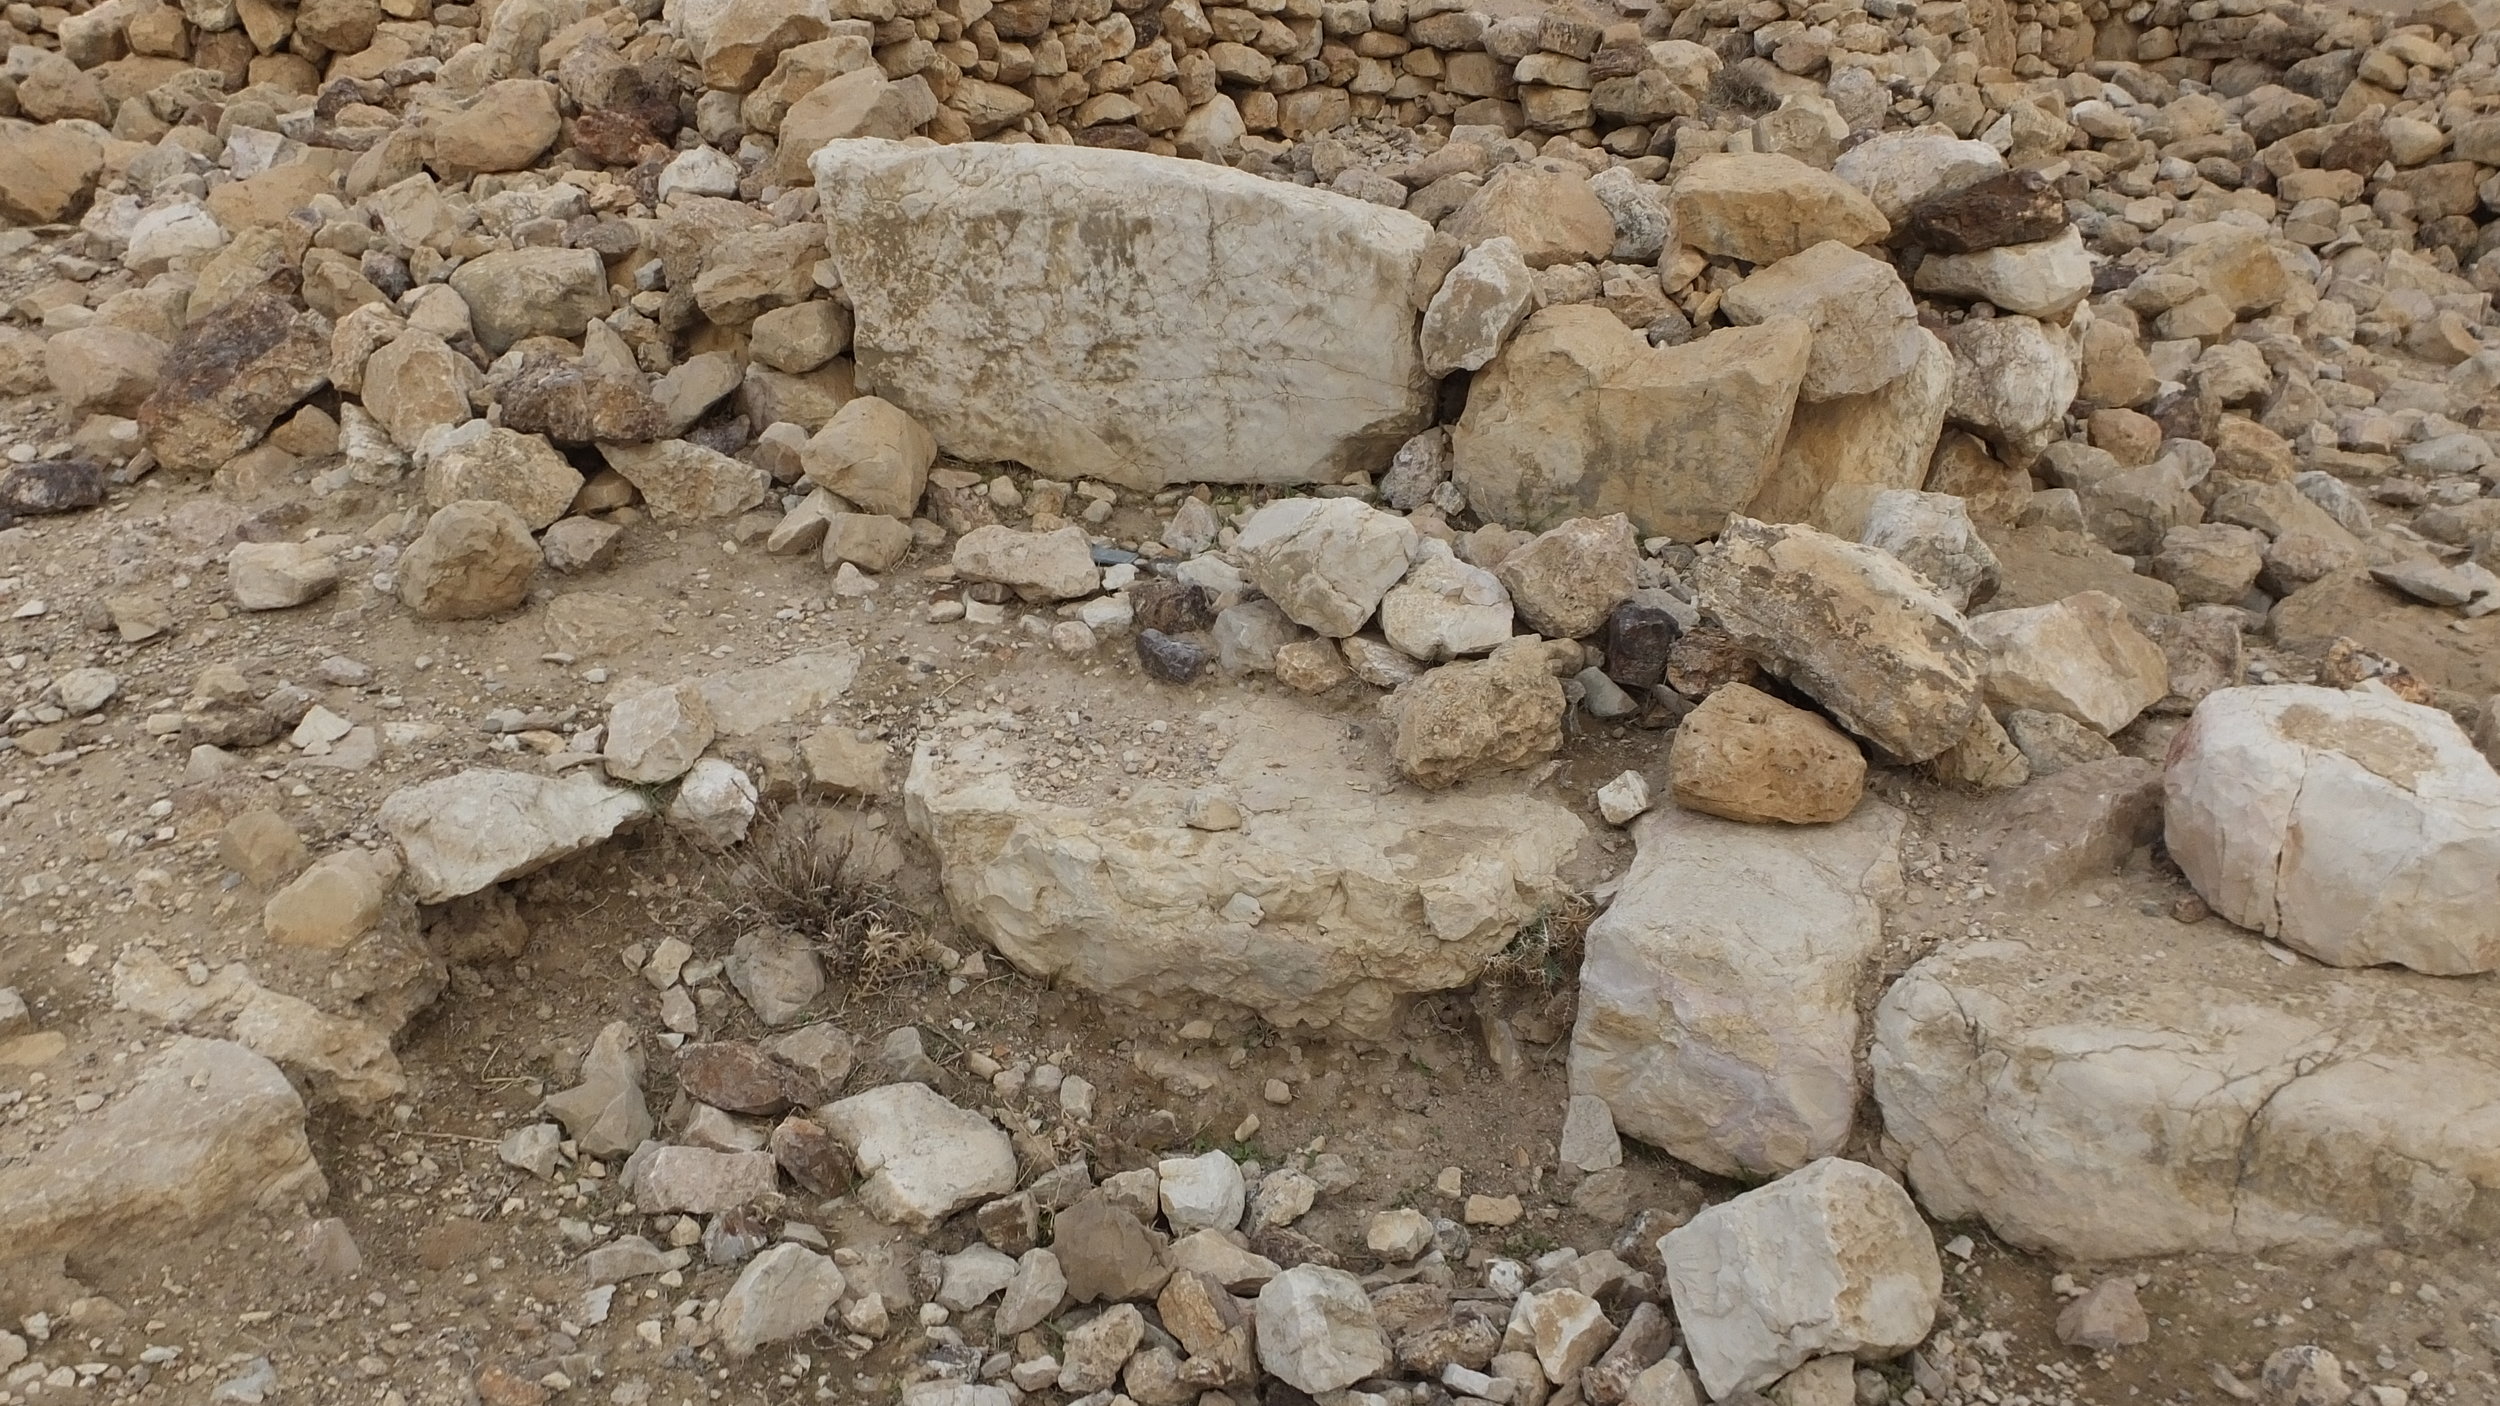 (10) In Some Places, an Earlier Wall is Visible Underneath the Remains Visible upon the Surface.jpg